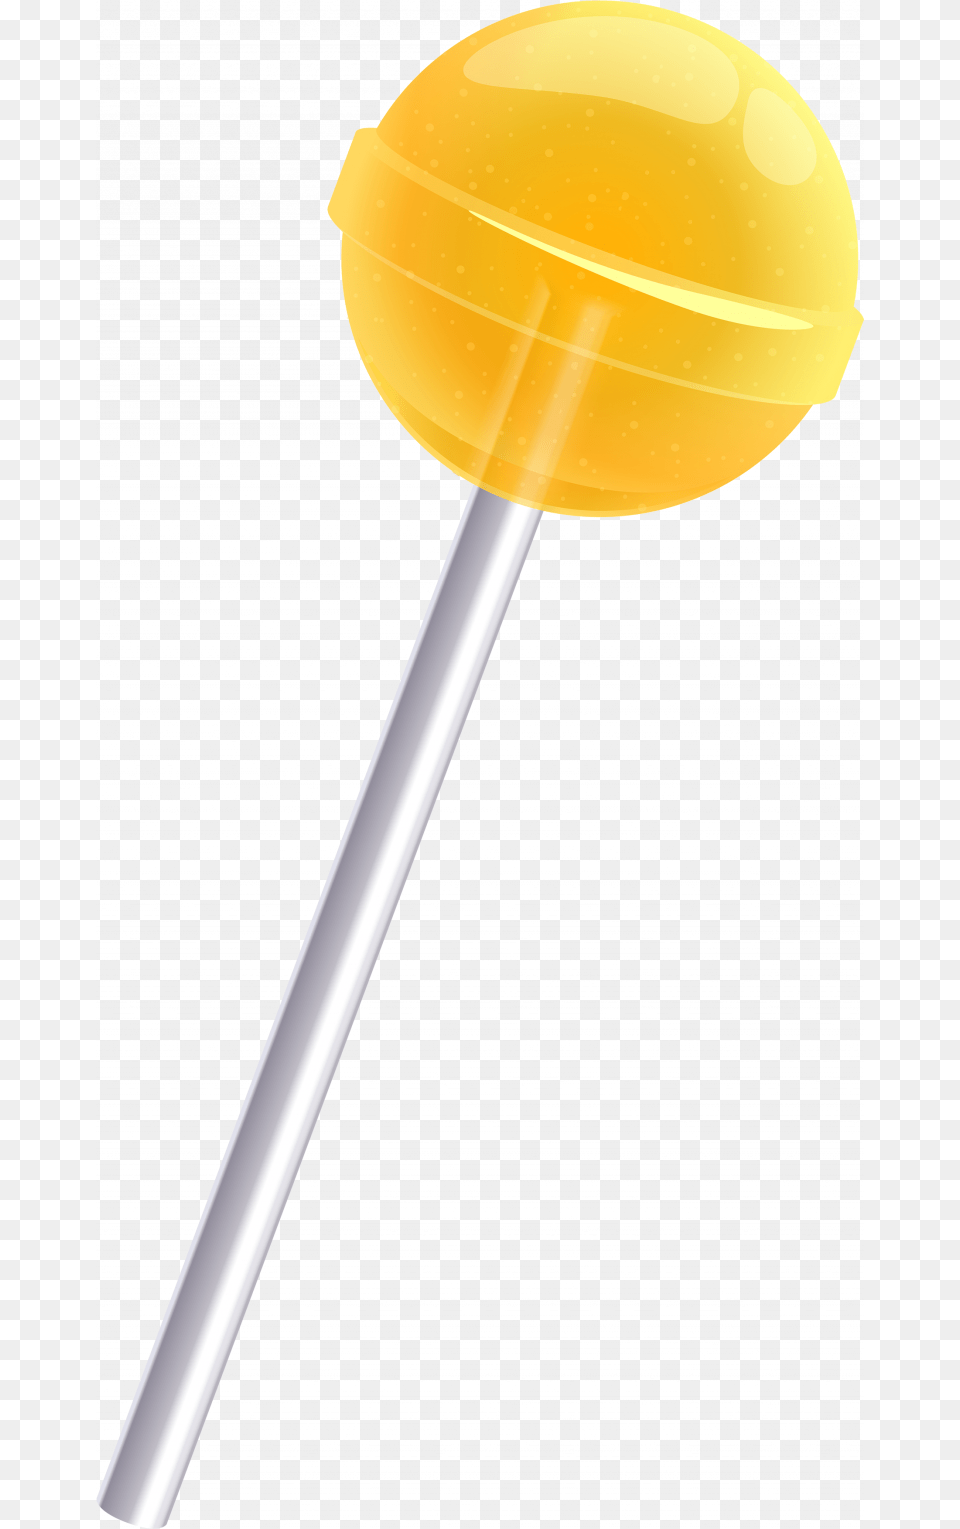 Download This High Resolution Lollipop High Quality Yellow Lollipop, Candy, Food, Sweets Png